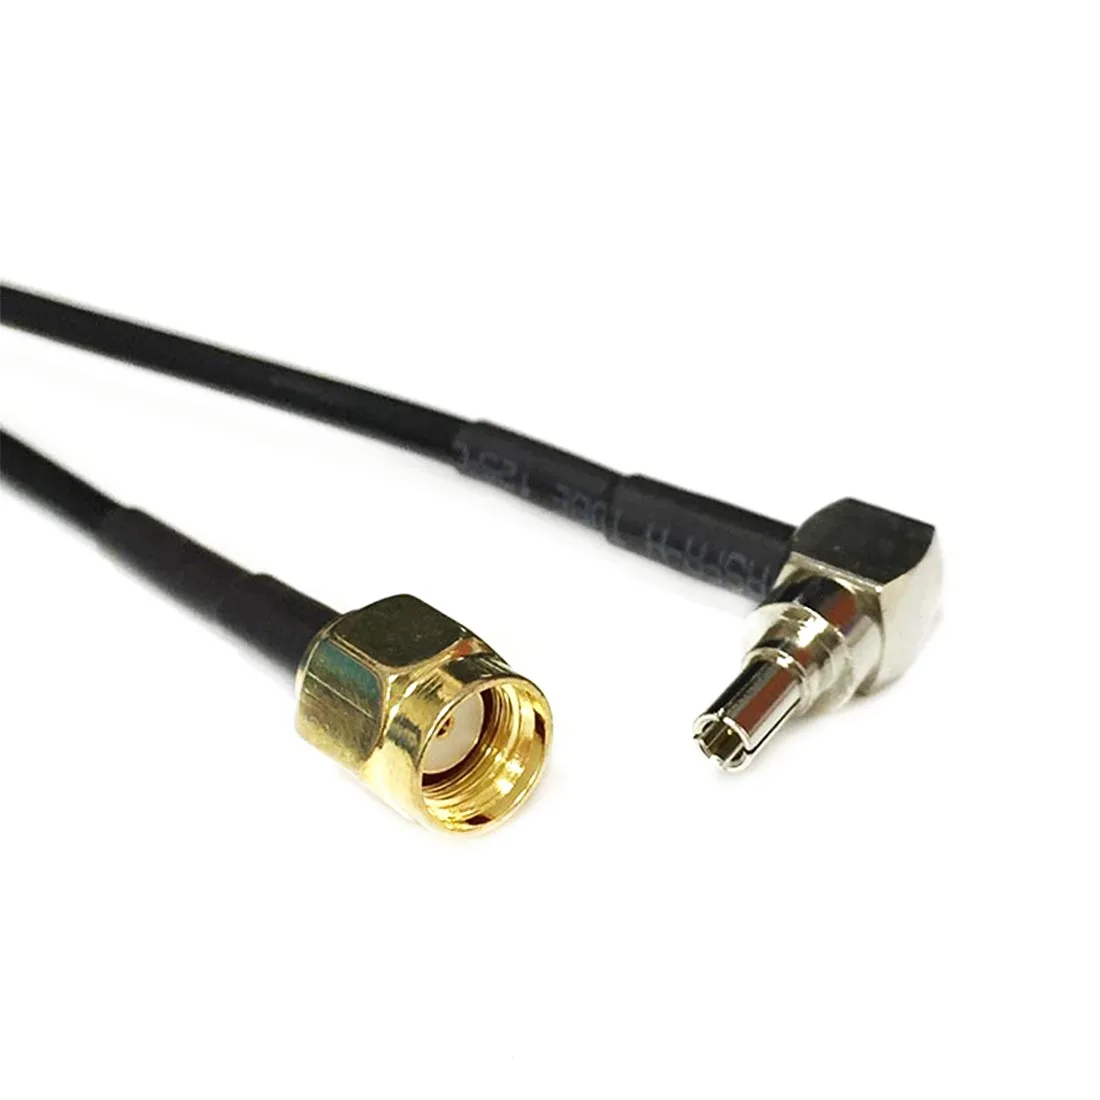 

Wireless Modem Wire RP-SMA Male Plug Switch CRC9 Right Angle Connector RG174 Cable 20cm 8" Wholesale Fast Ship New